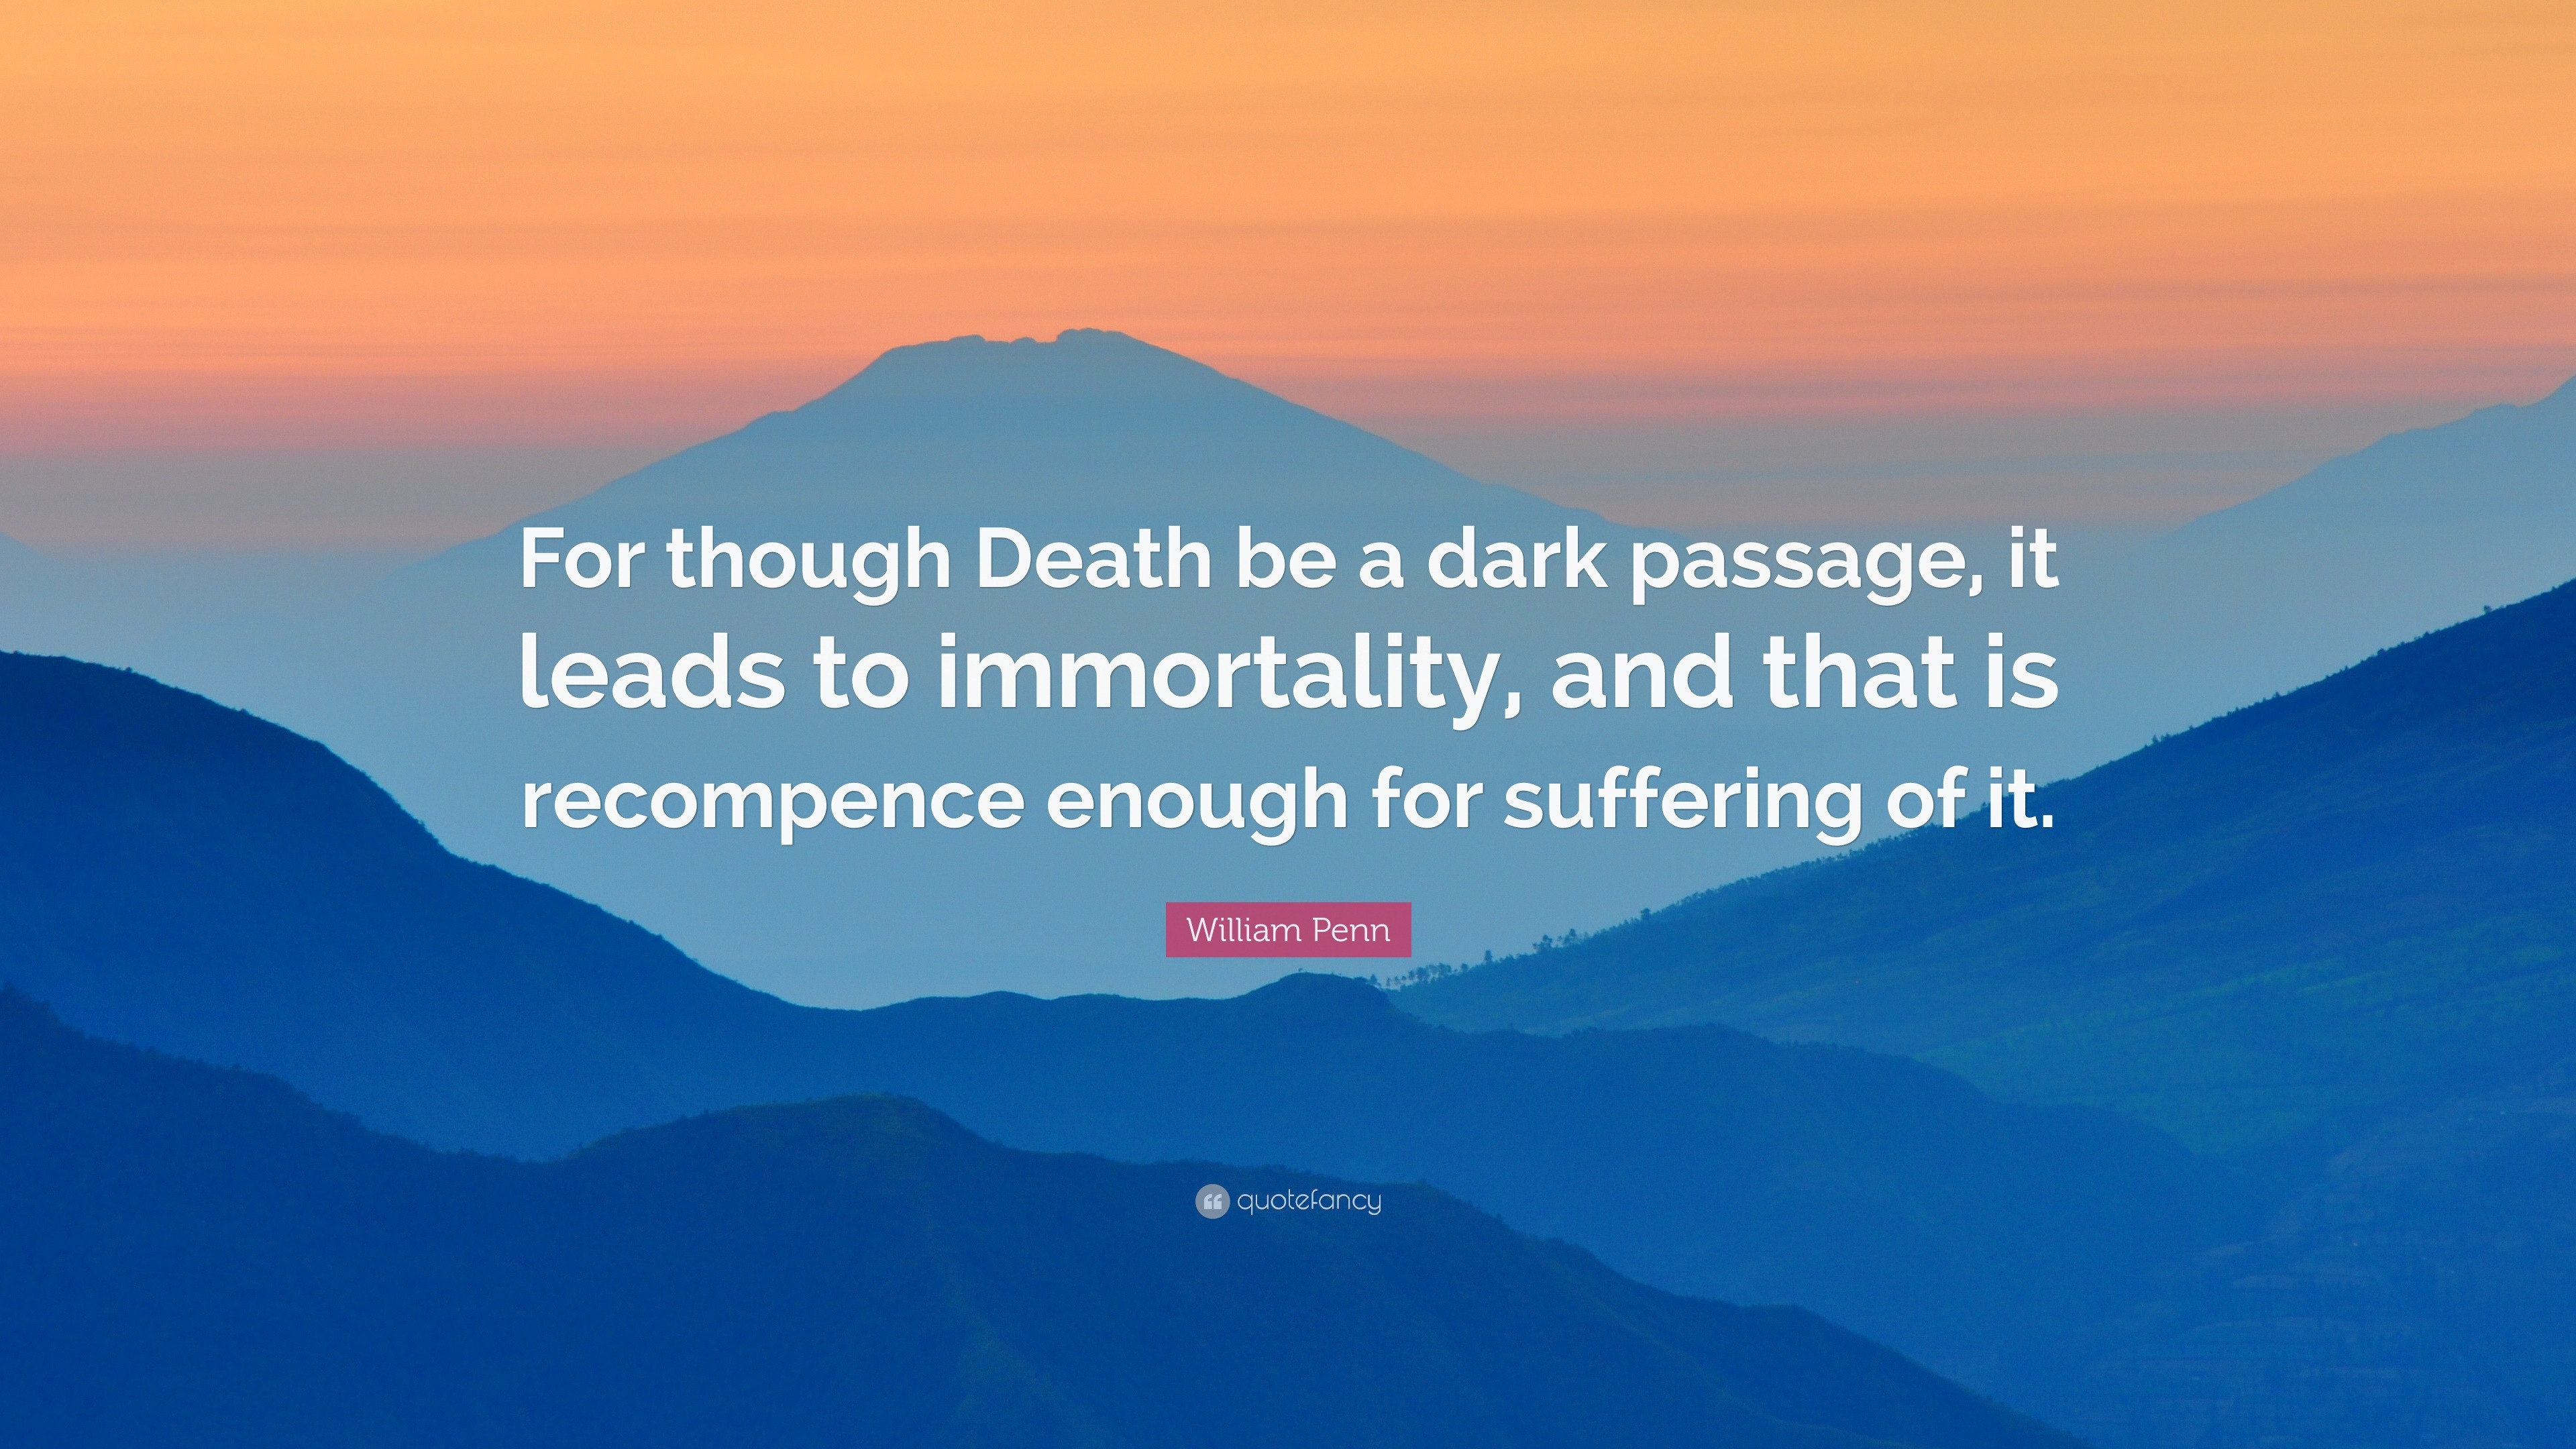 William Penn Quote: “For though Death be a dark passage, it leads to ...